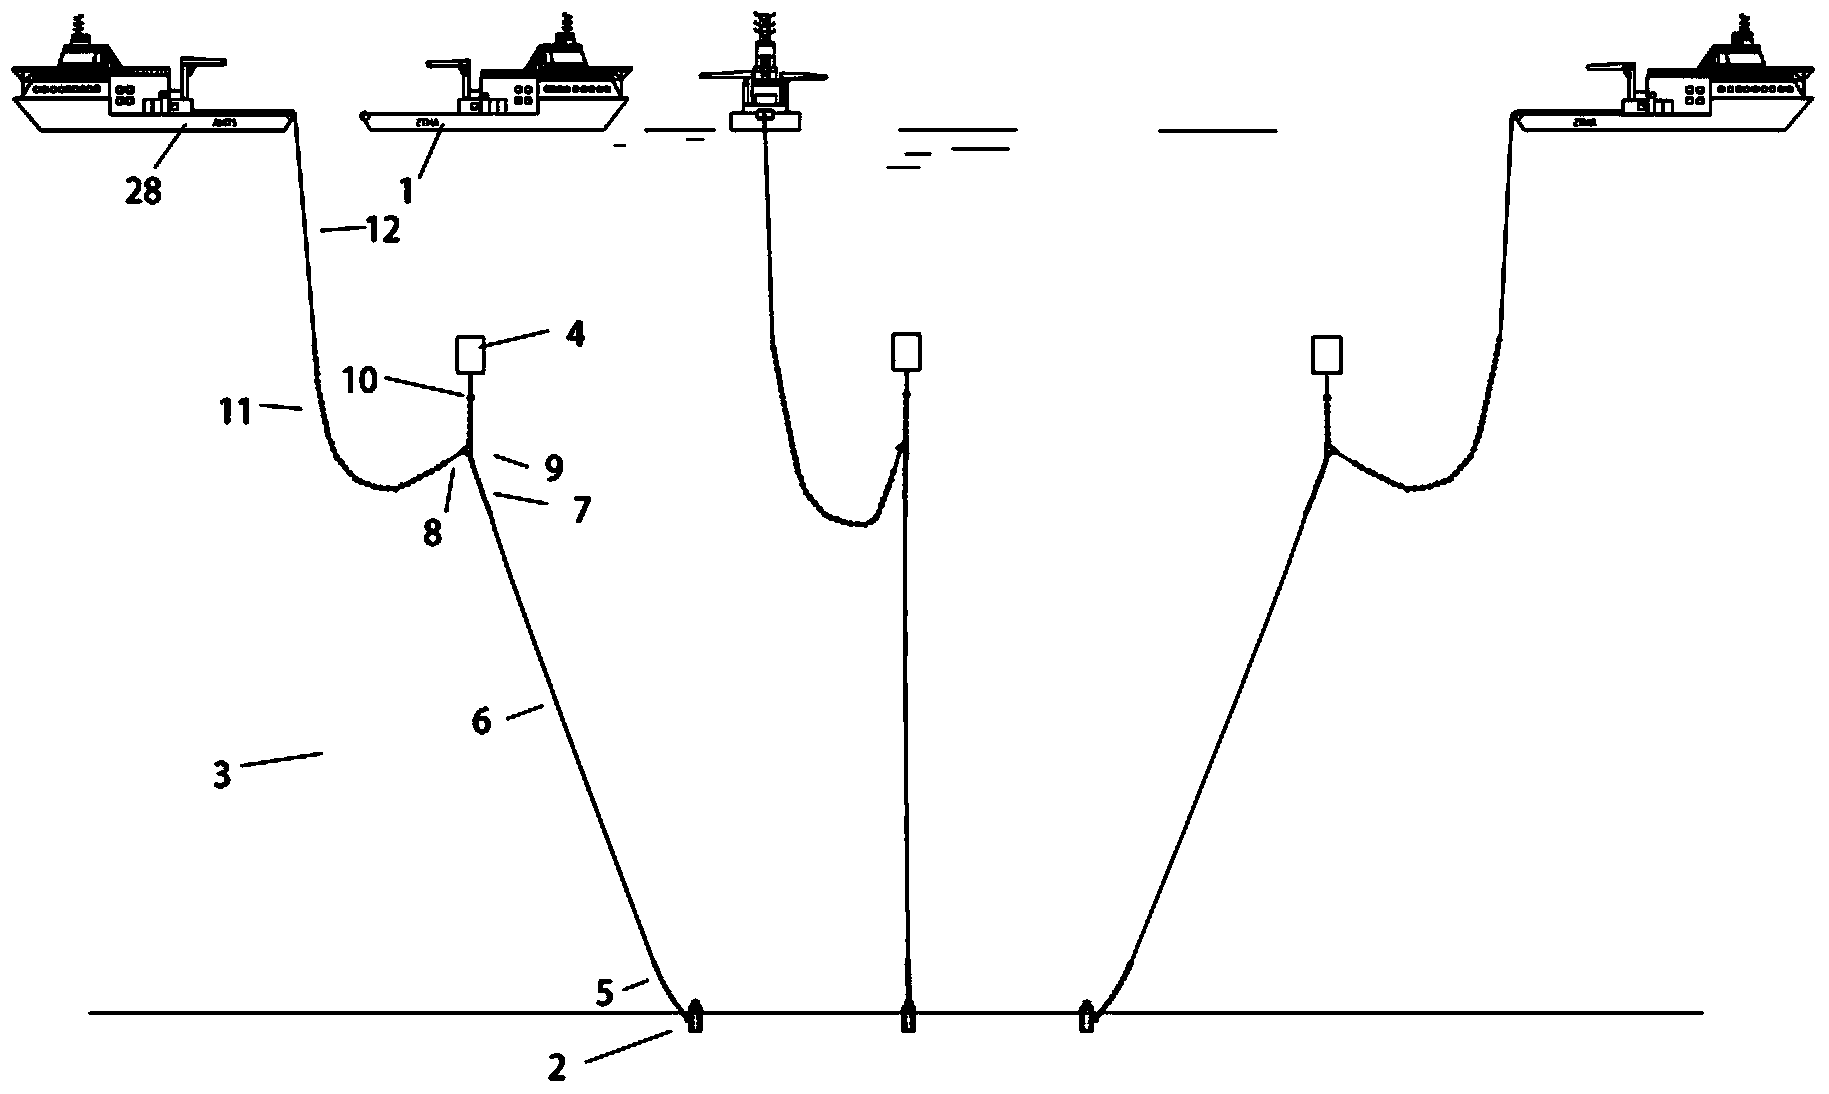 Method for mounting submerged buoy in ultra-deep water